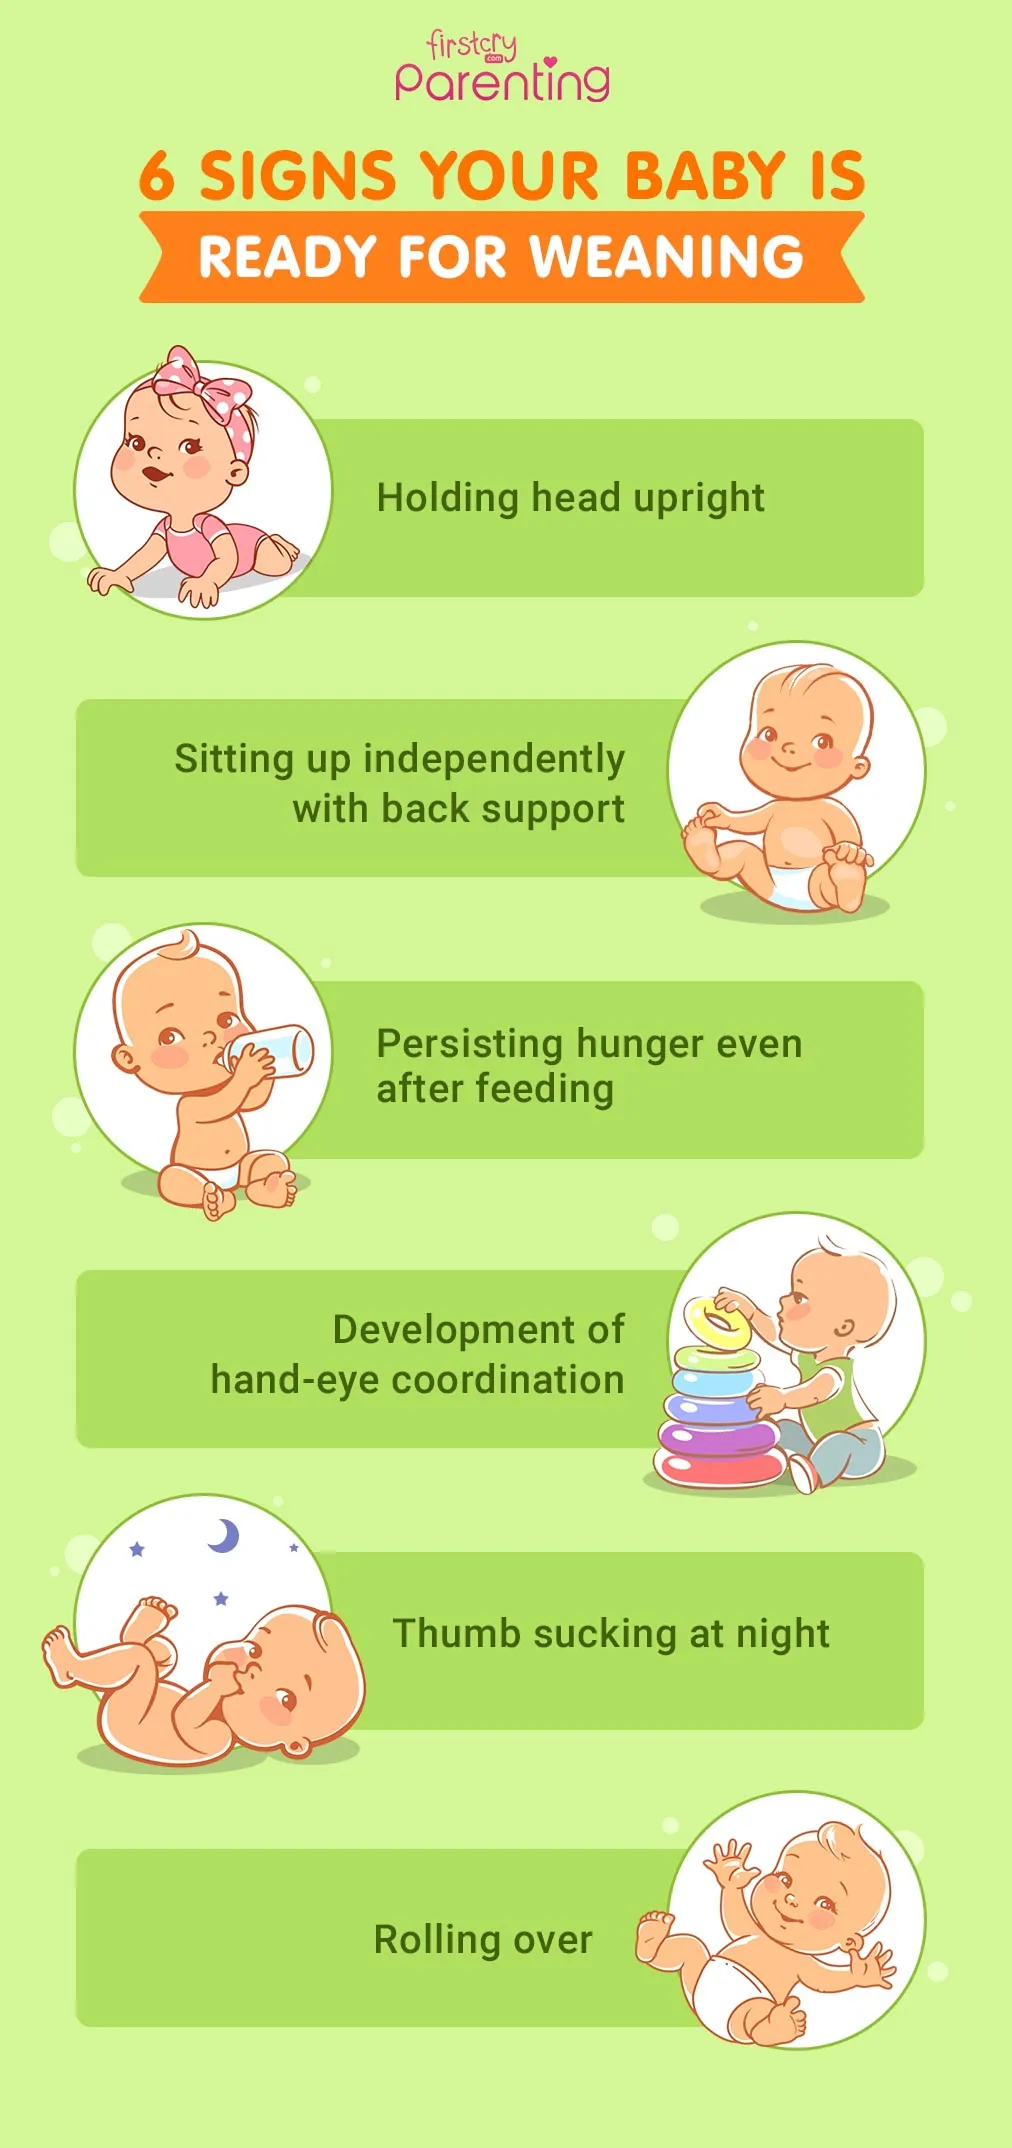 Signs Your Baby Is Ready for Weaning